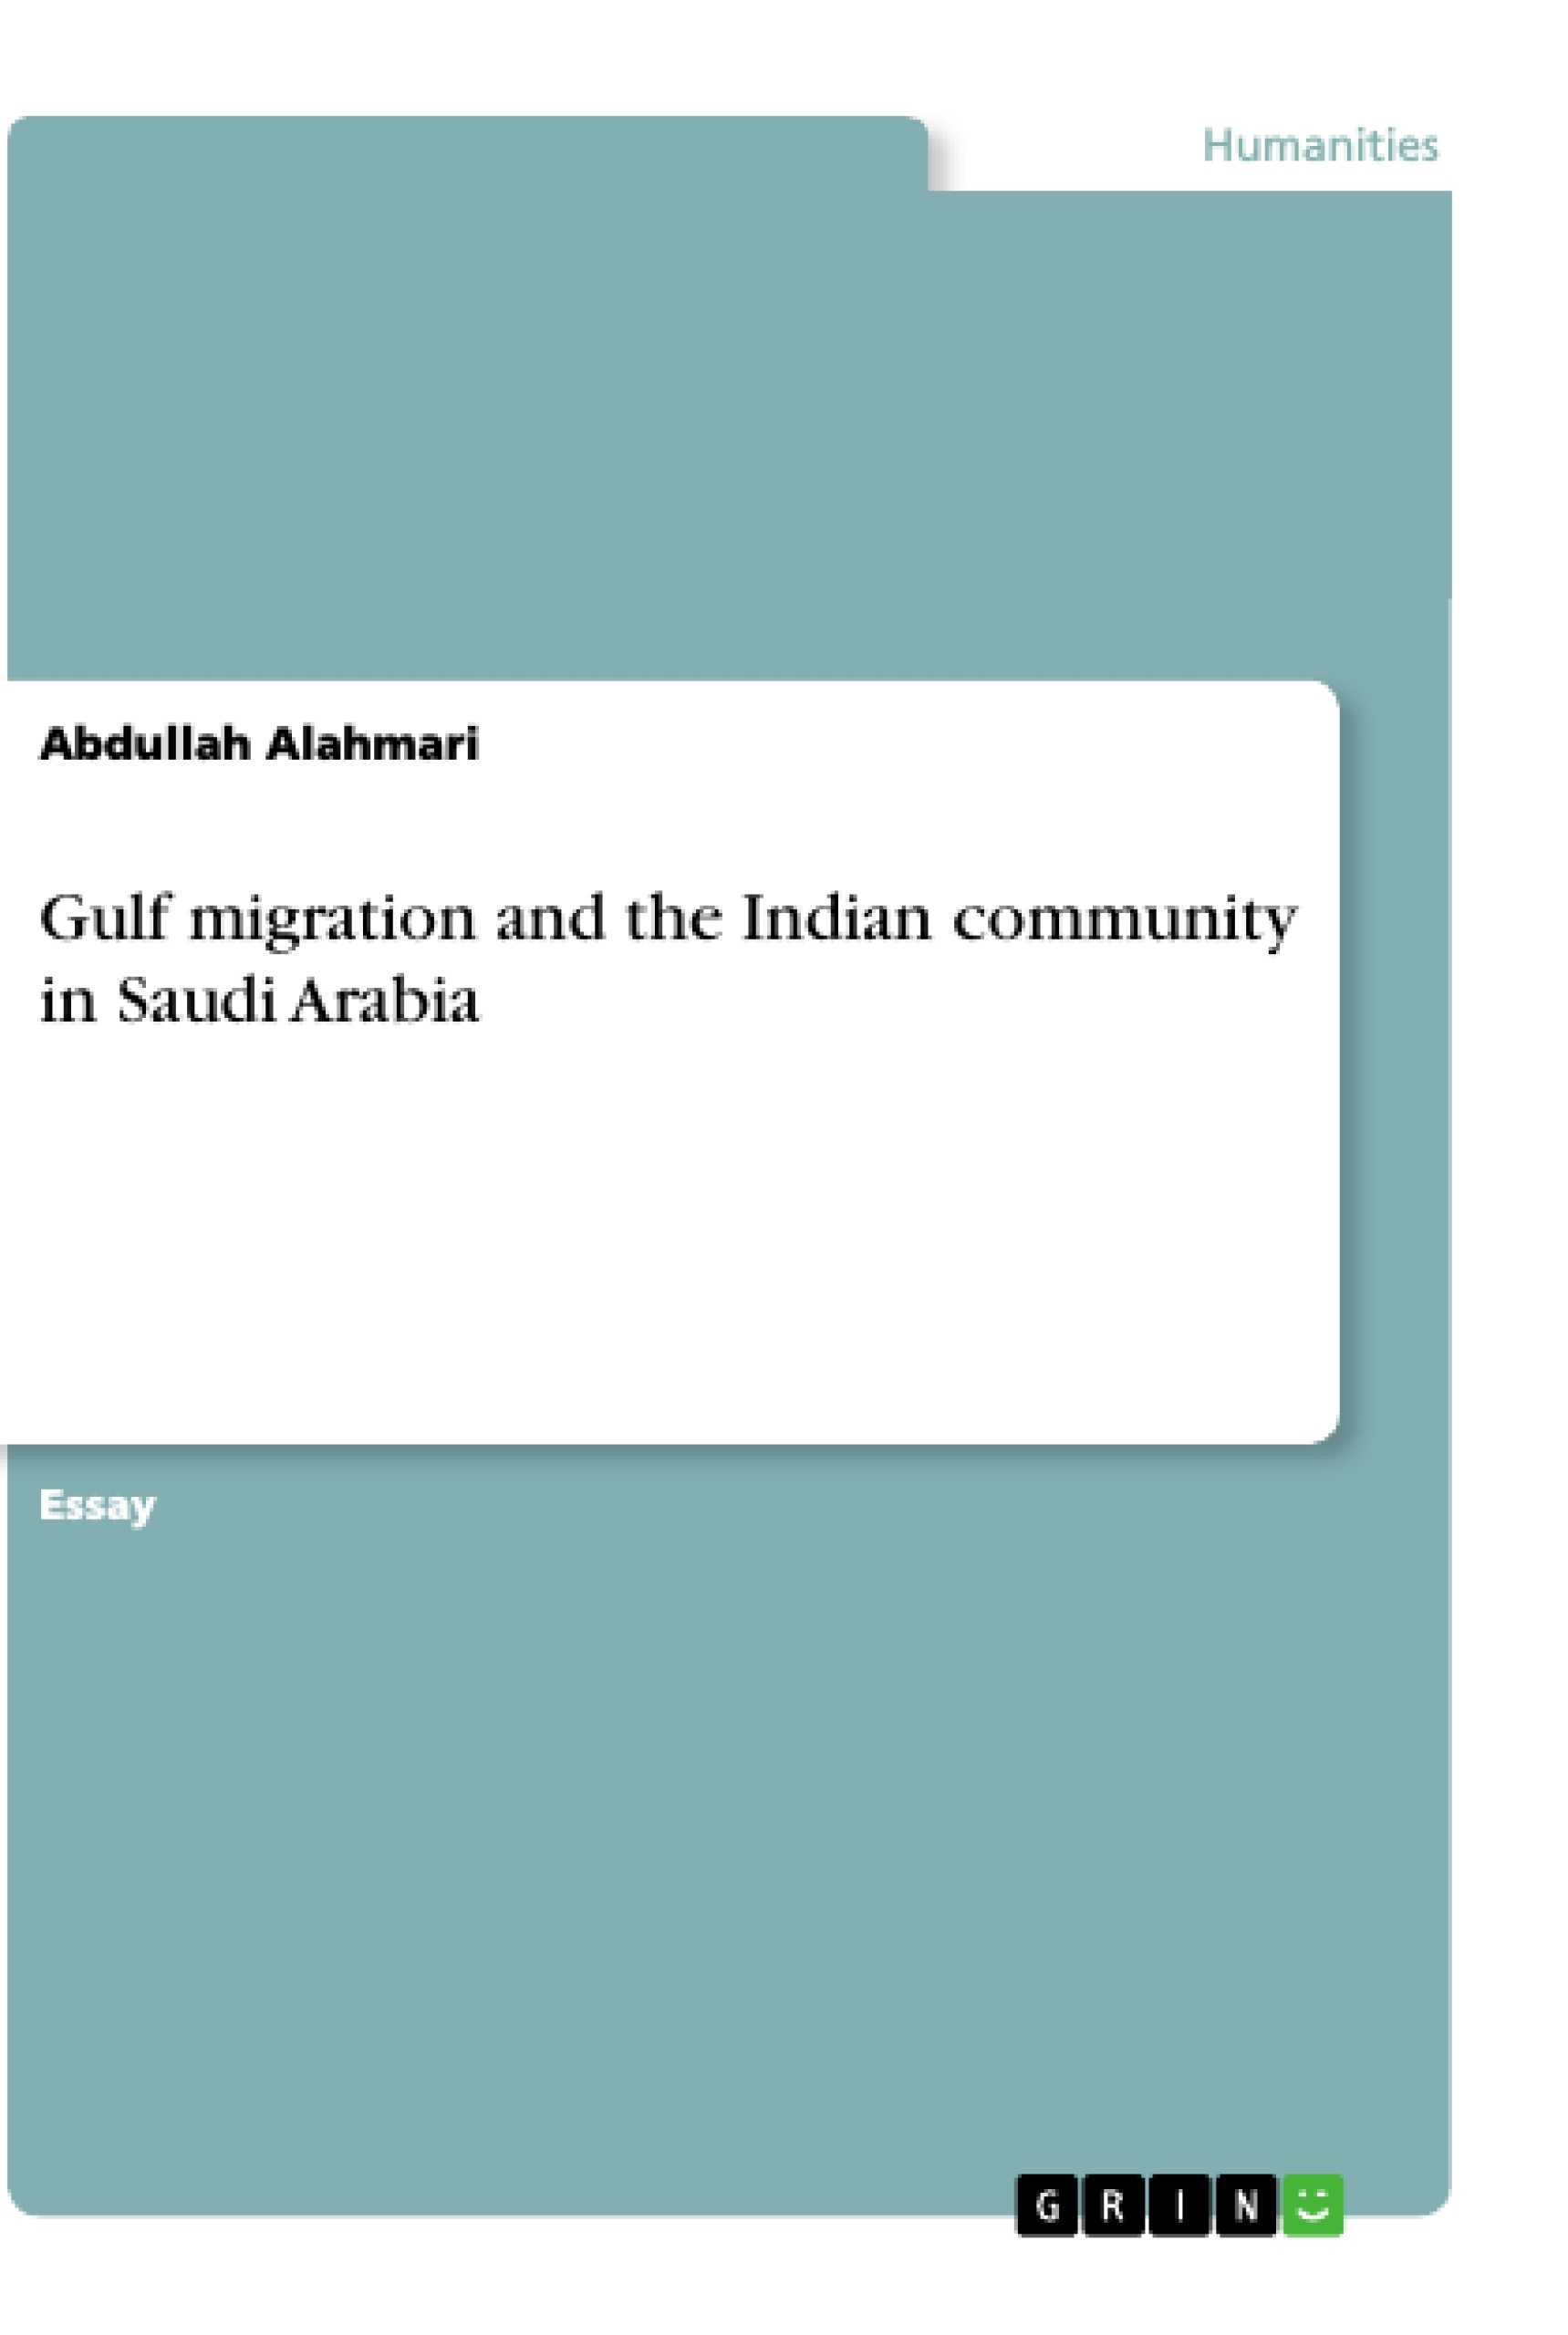 Título: Gulf migration and the Indian community in Saudi Arabia